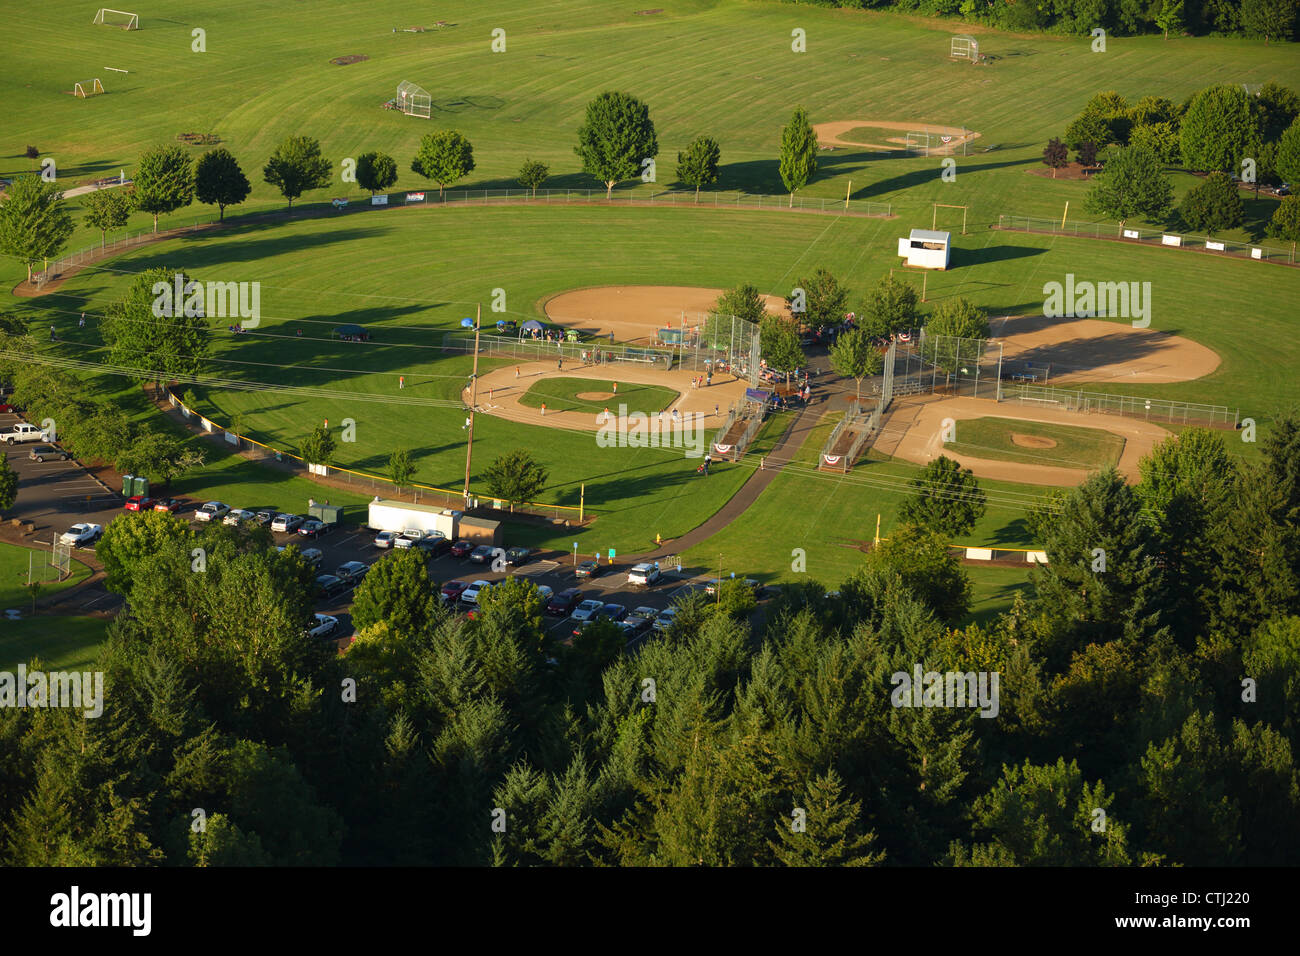 Aerial view of park with baseball fields Stock Photo